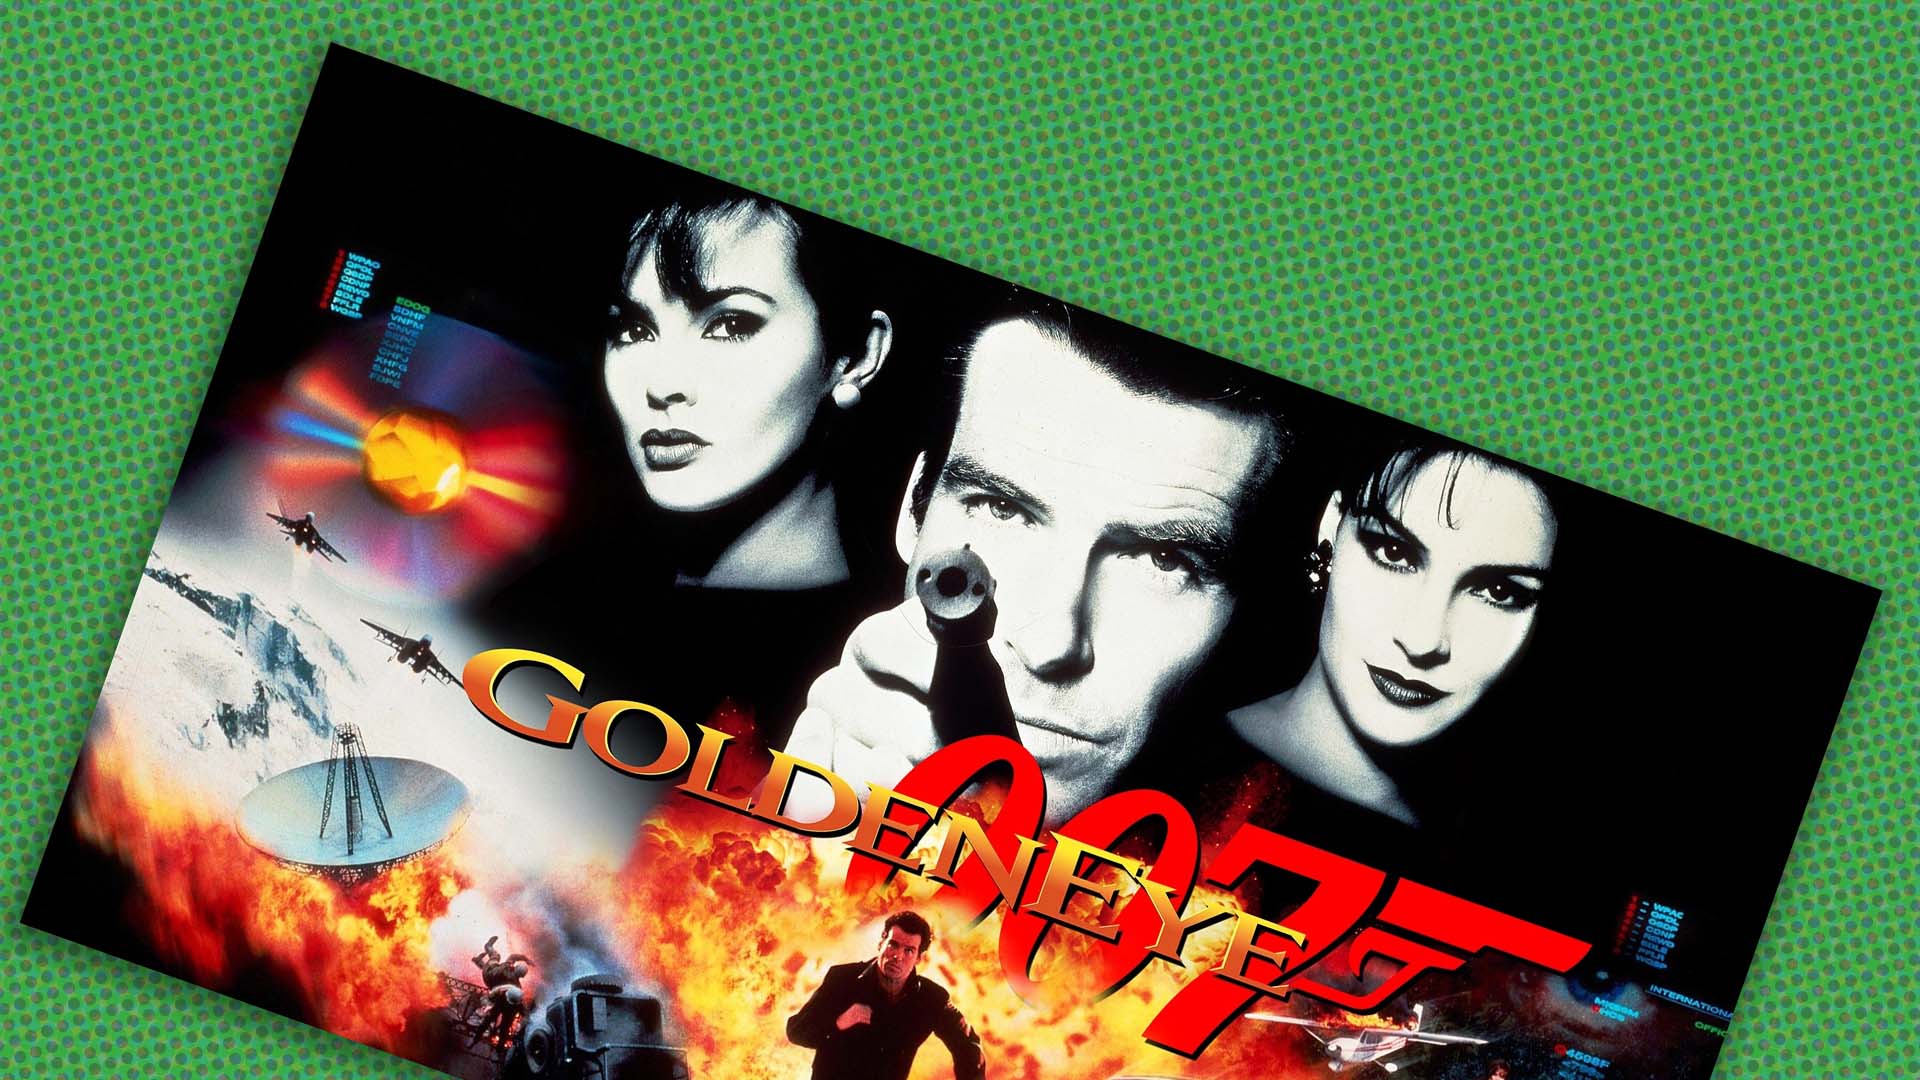 GoldenEye's Xbox remaster has leaked online - and it's fully playable on PC